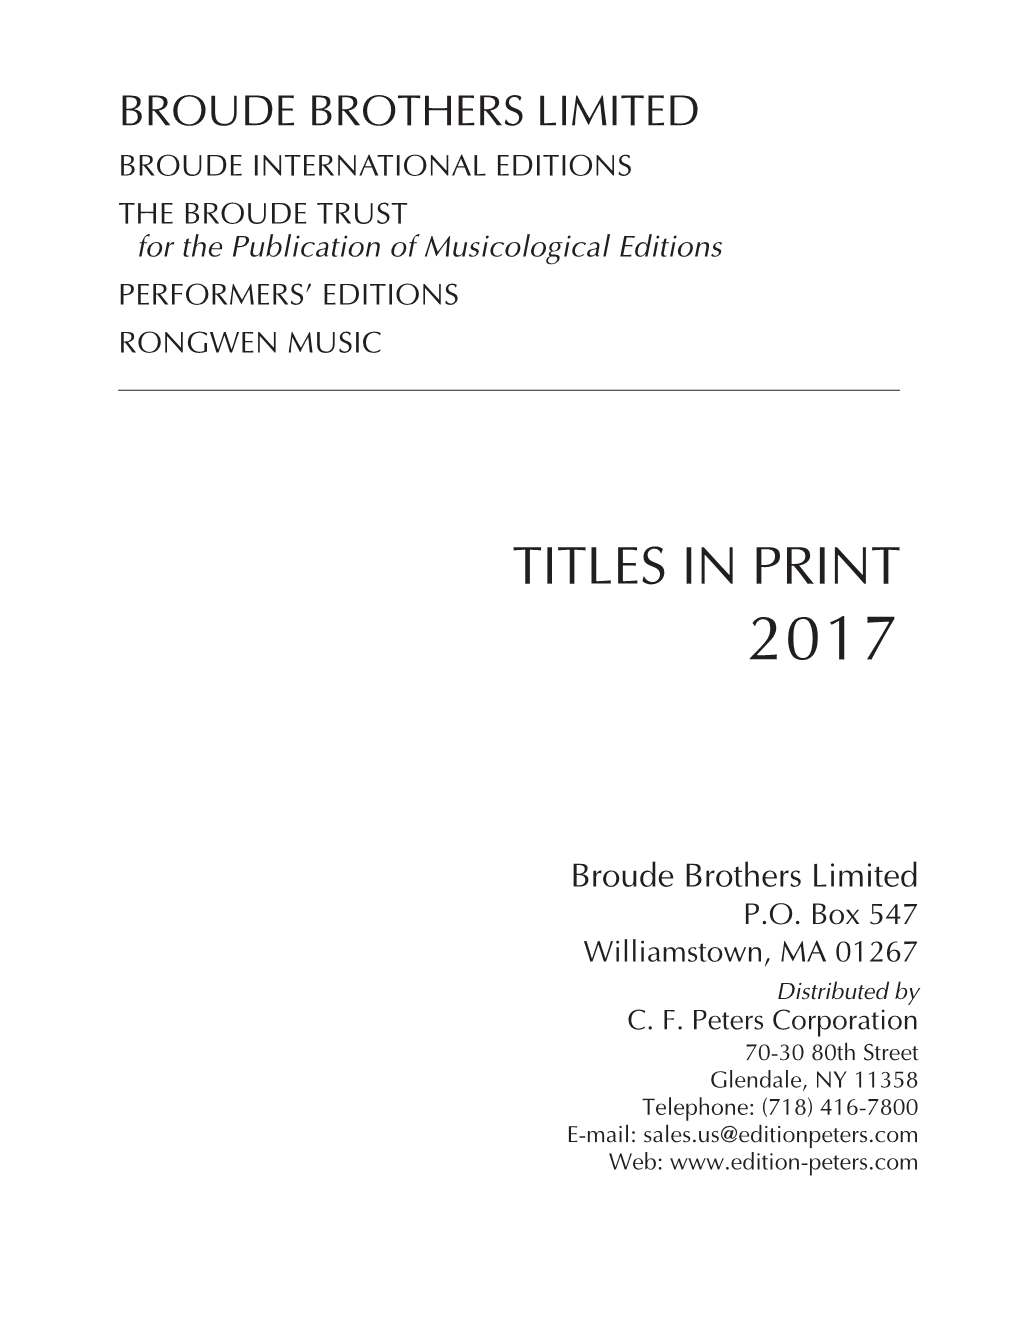 Titles in Print 2017